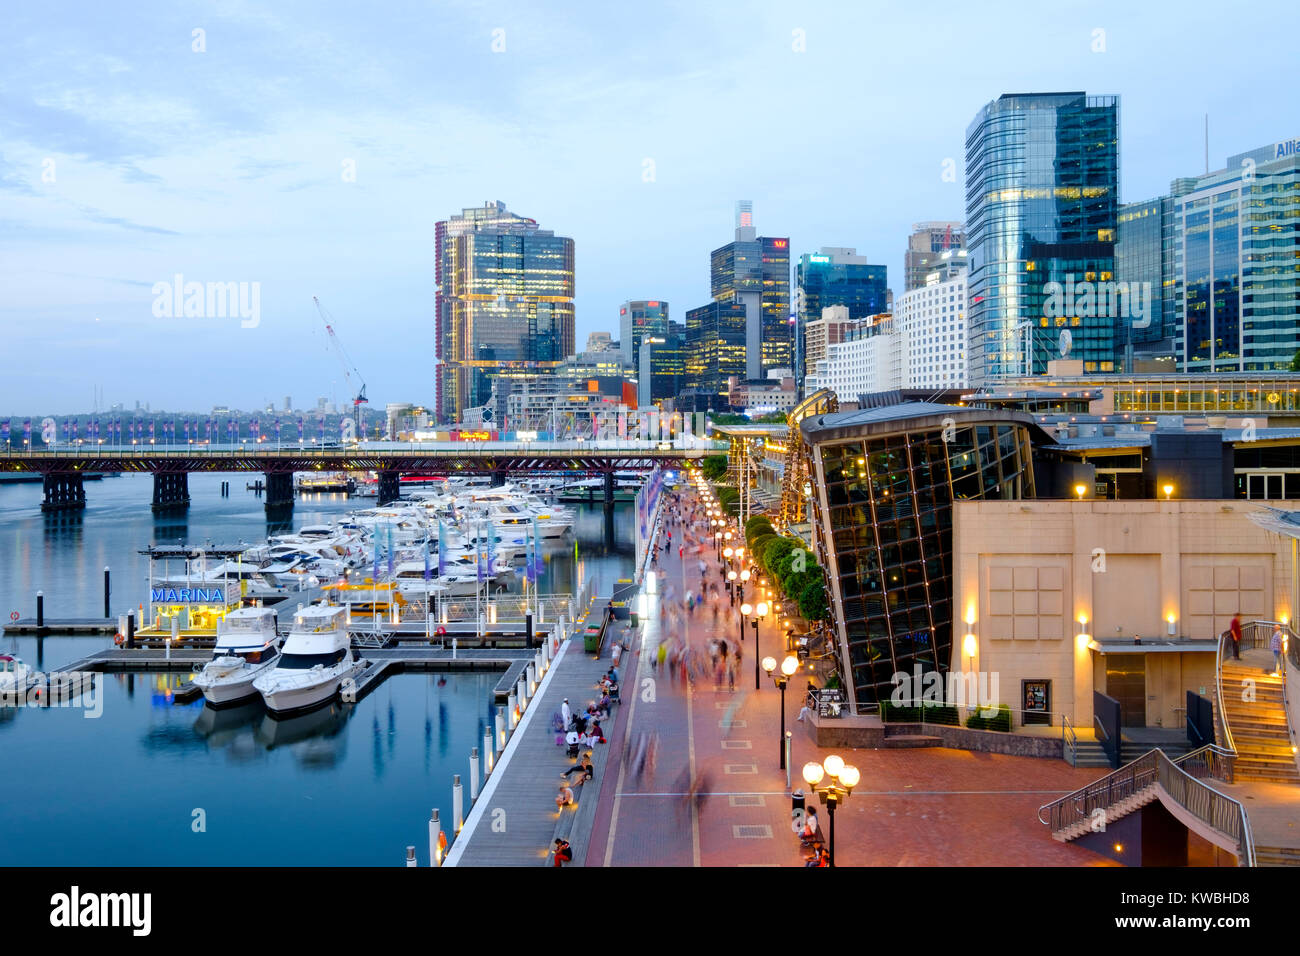 Cockle Bay Wharf Promenade in Darling Harbour (Harbor), Sydney, Australia, a very popular tourist attraction, waterfront cafes and restaurants Stock Photo